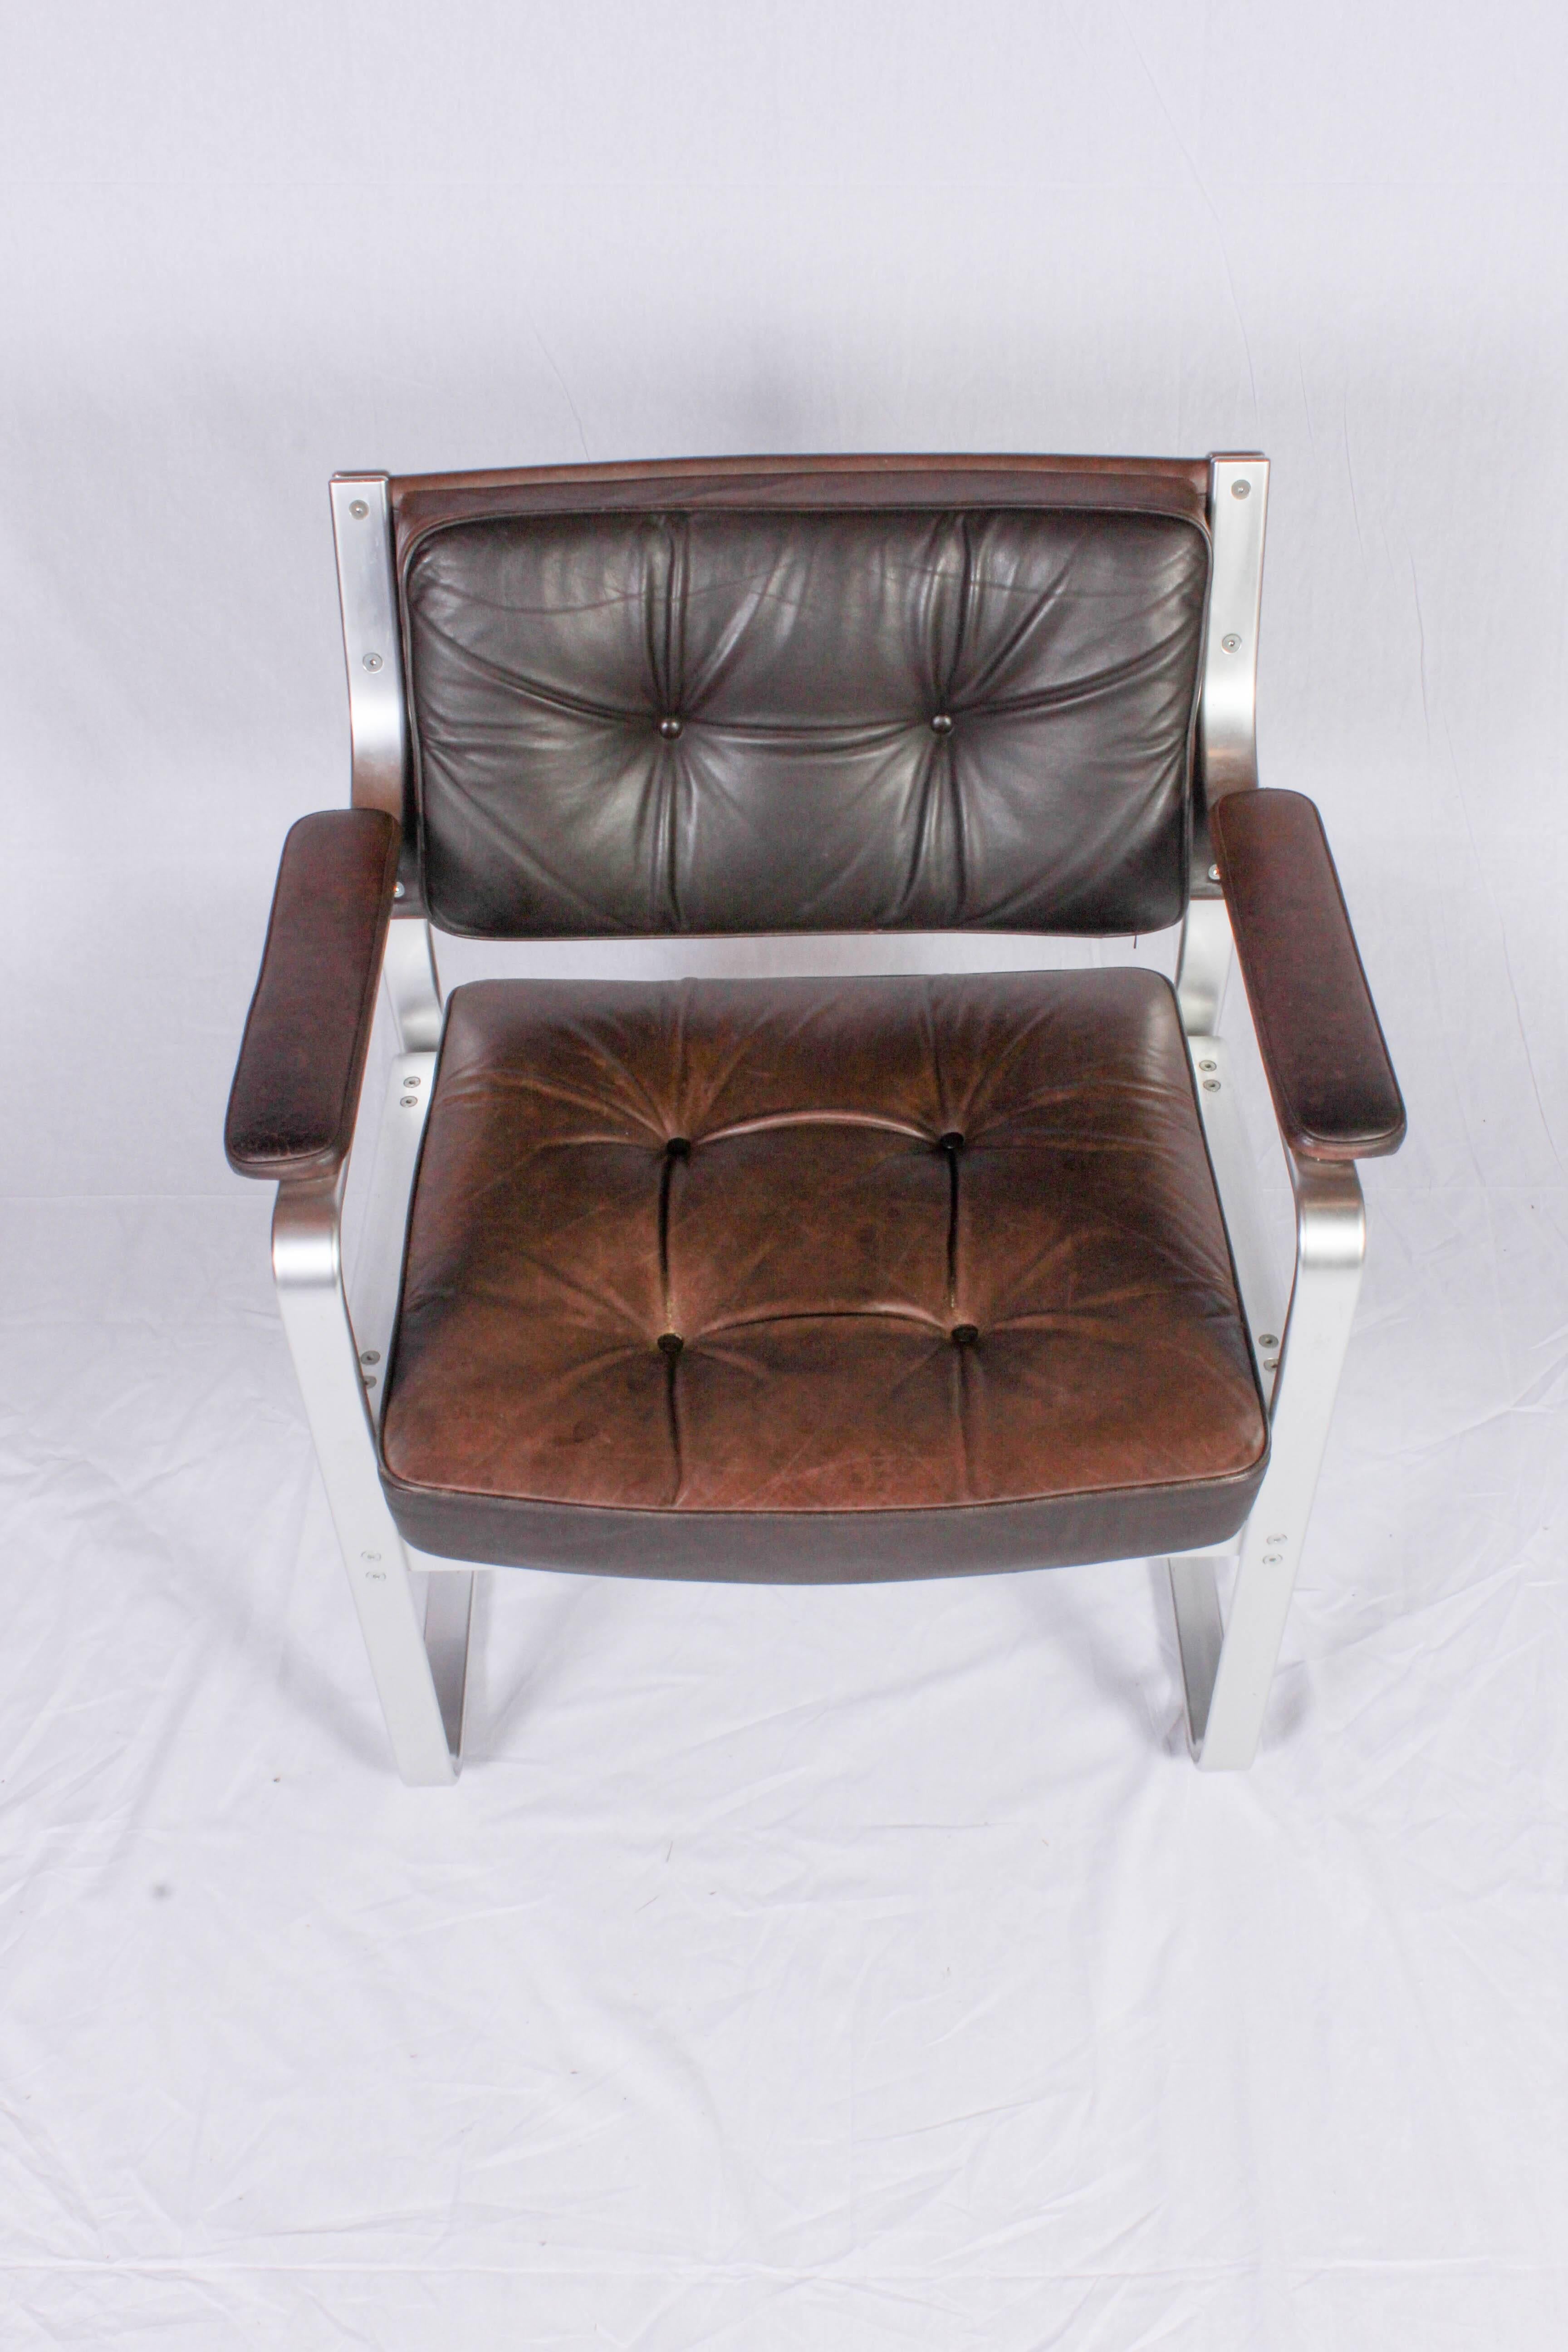 Highly decorative midcentury chair by Swedish designer Karl Erik Ekselius. The chair is made out of aluminum and brown leather with nice patina. The condition is very good with patinated leather and signs of usage consistent with age.